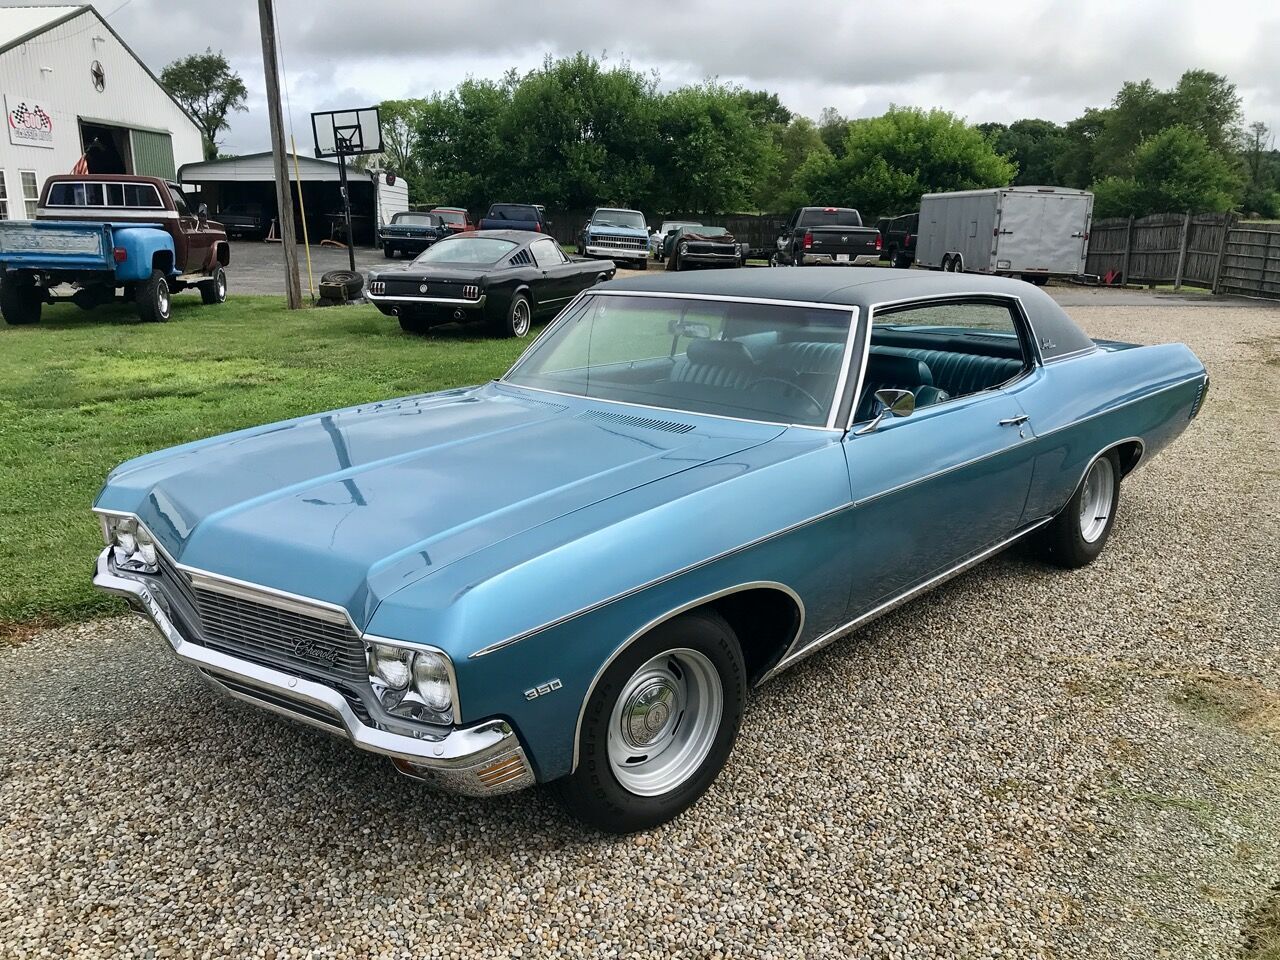 1970 Chevrolet Impala For Sale In Los Angeles, CA - Carsforsale.com®